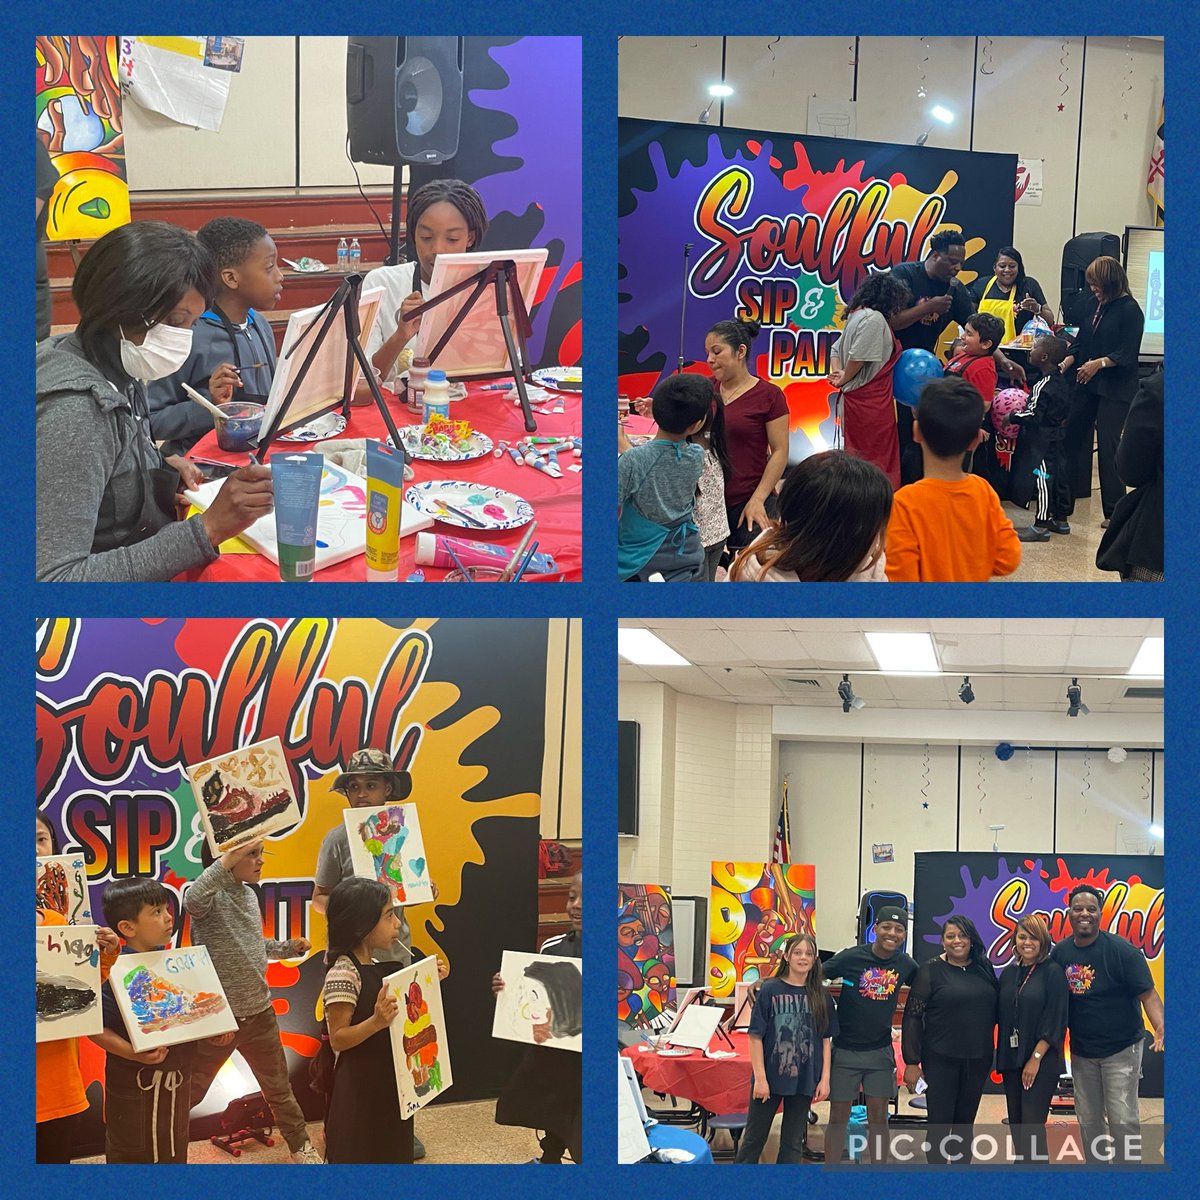 Family Fun with Soulful Sip and Paint featuring Artist Randy Walters. Ms Savage organized an amazing opportunity for our students and families. Dancing,Games, Laughter, and Art filled the room! ⁦@HEShusky_FCPS⁩ ⁦@MrsChelseyShaw⁩ ⁦@FCPSPrinKSeiss⁩